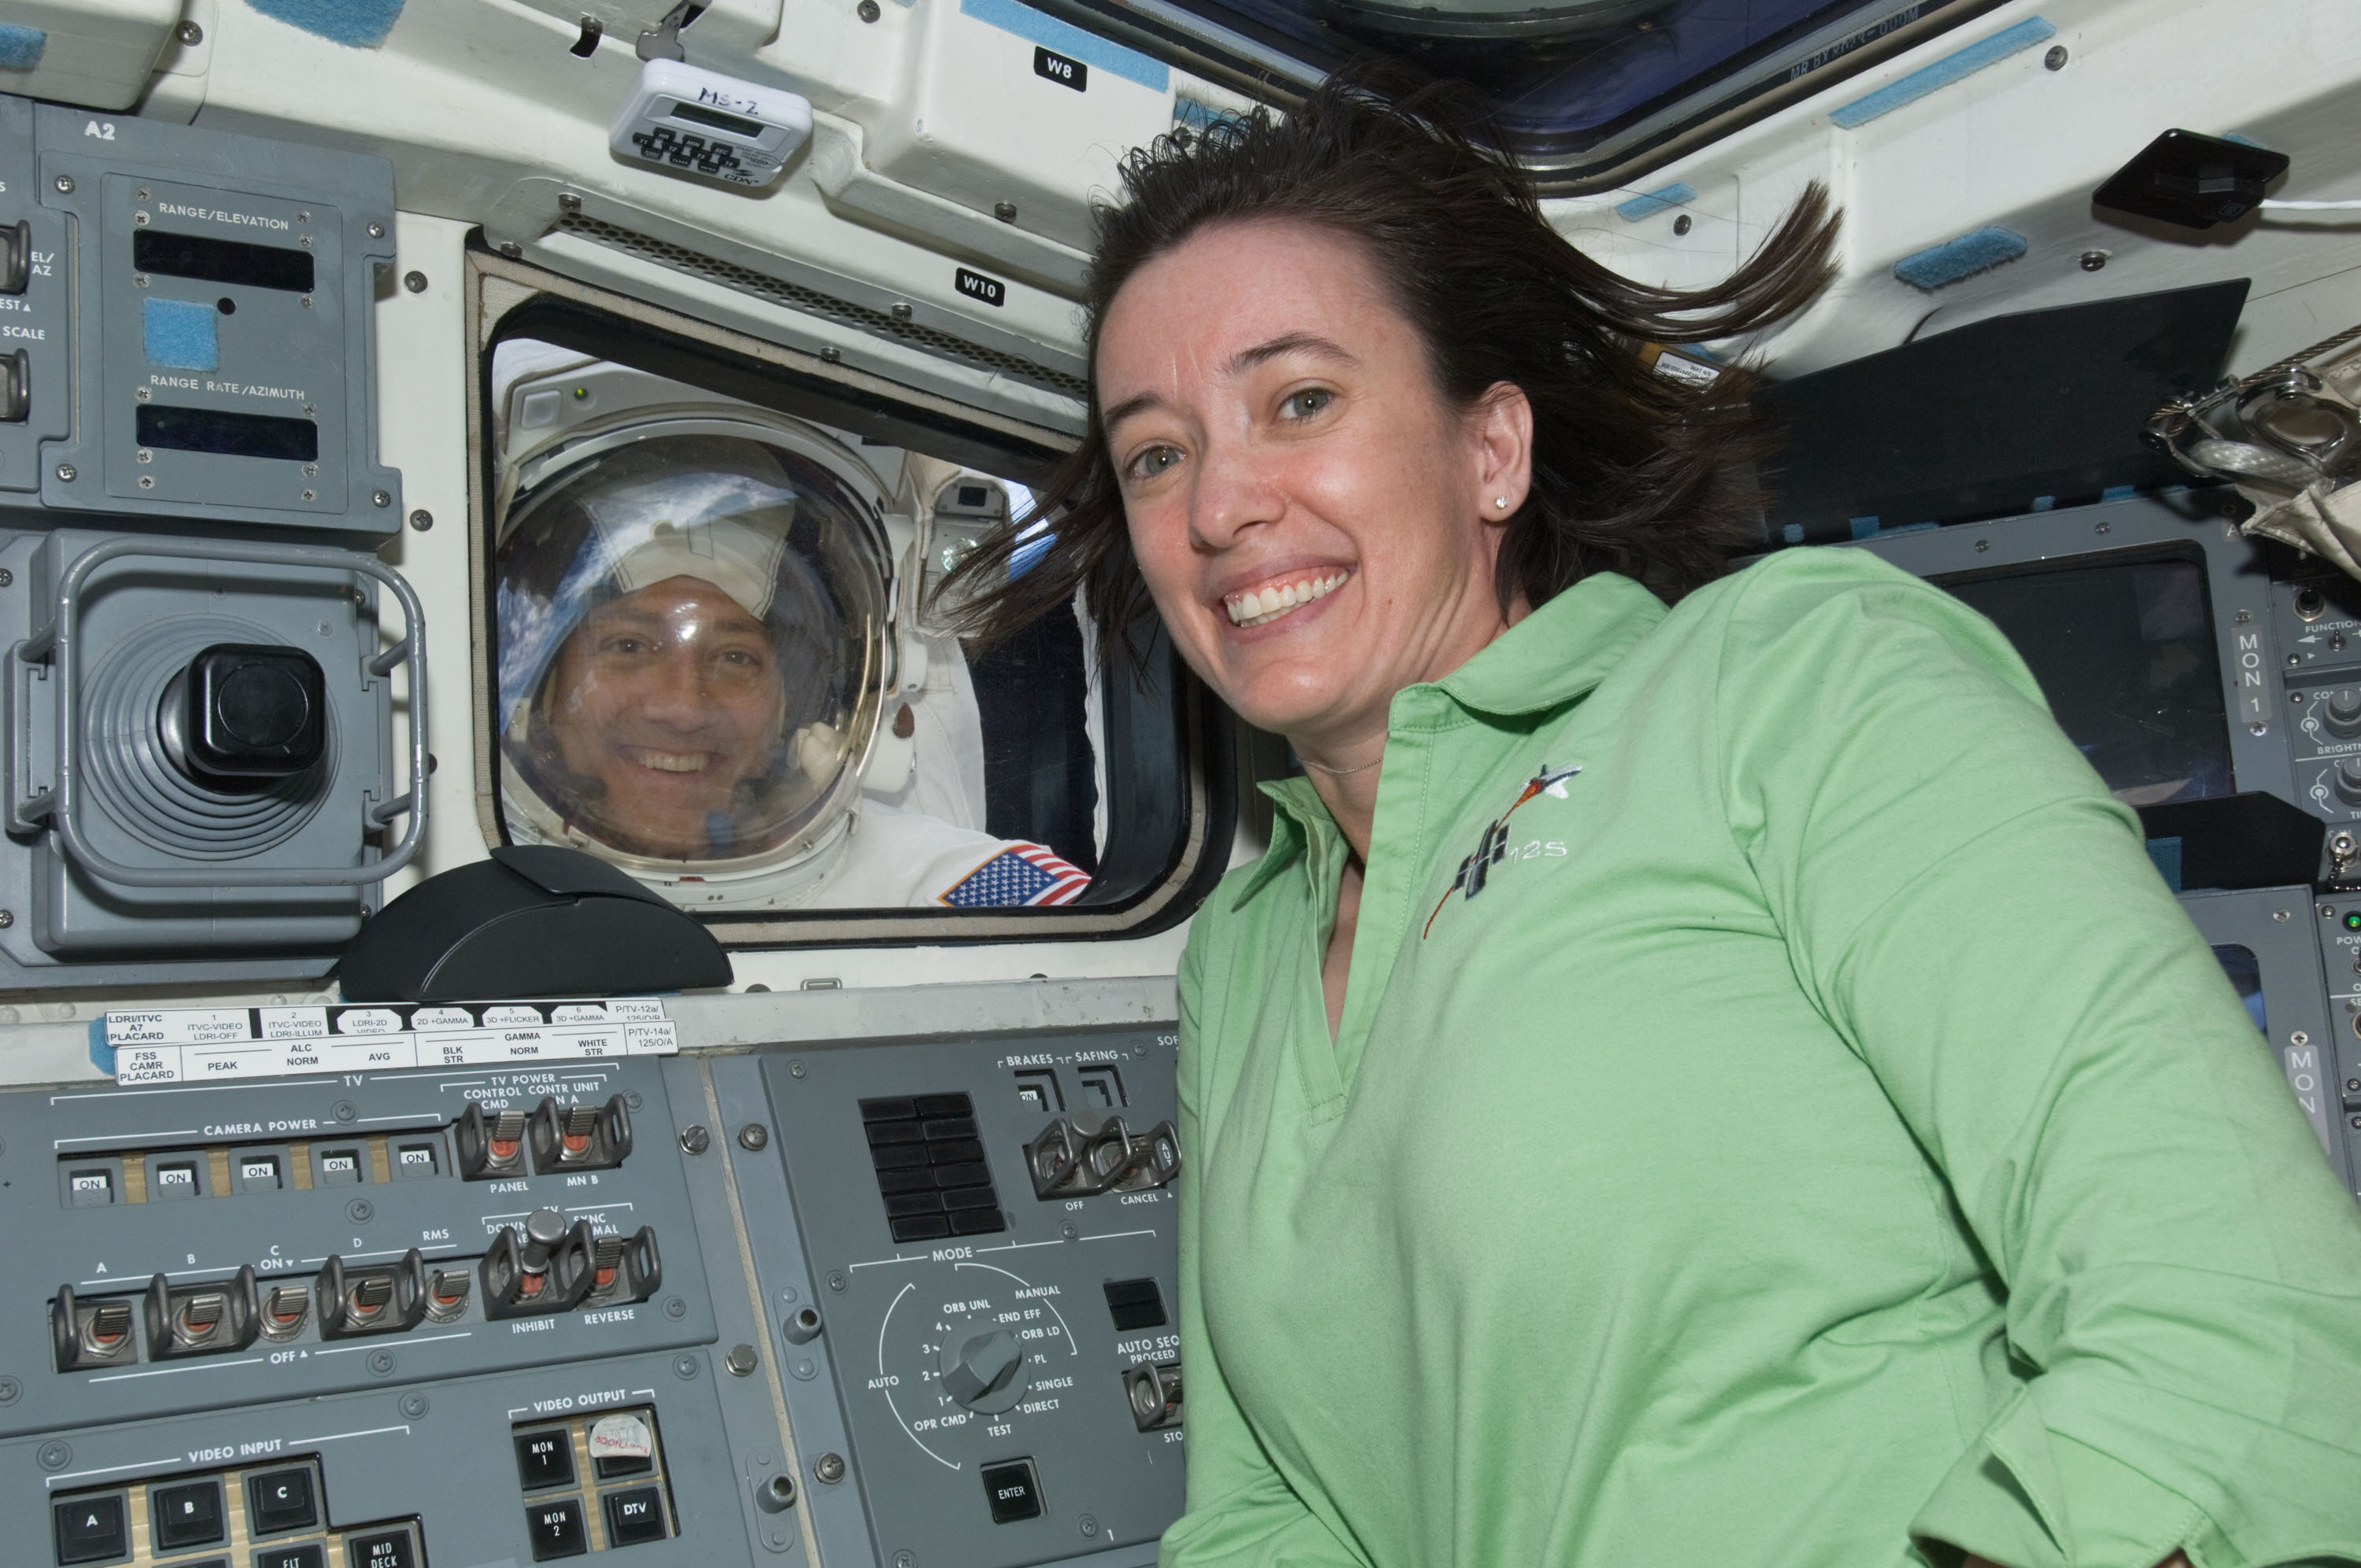 Two astronauts pose for a picture, one inside the crew cabin and one outside.